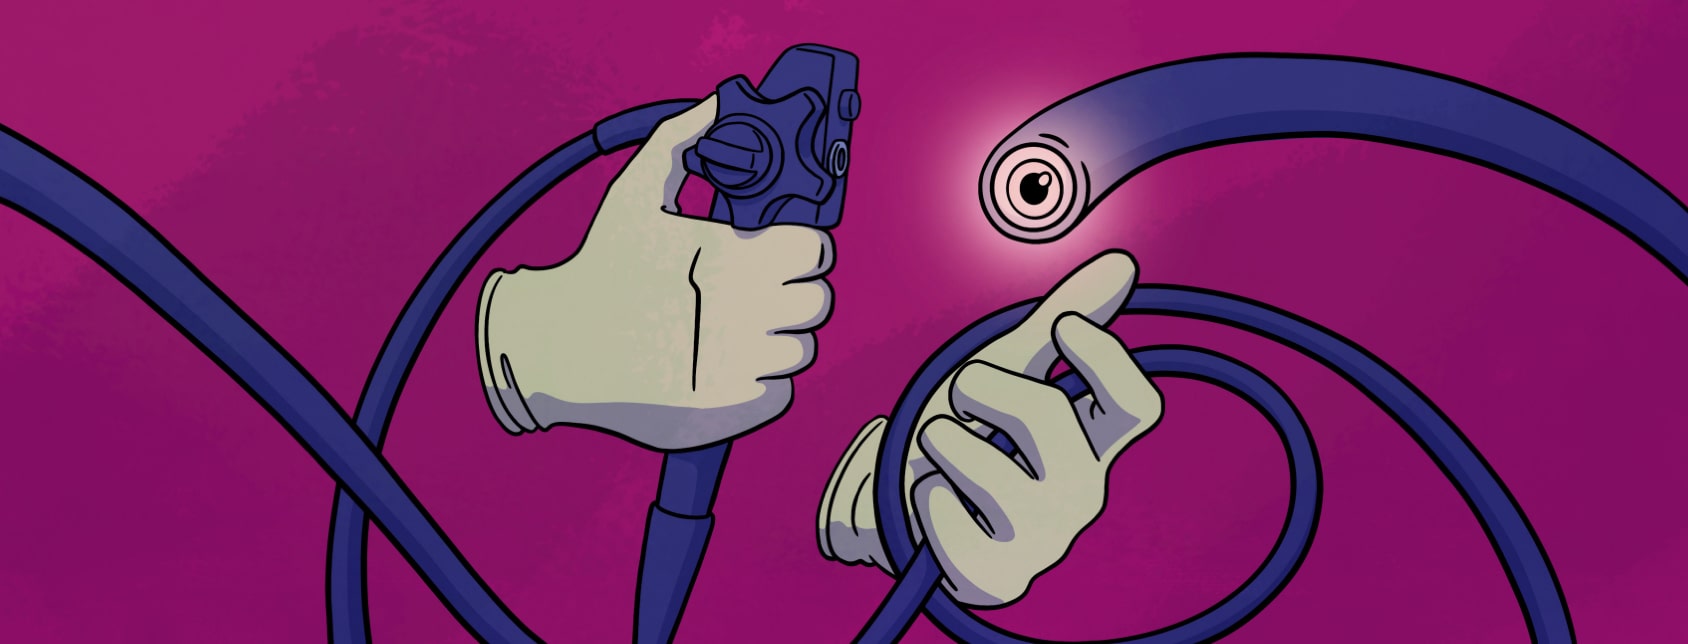 Gloved hands wrangling a serpent-like colonoscope with a glowing eye.